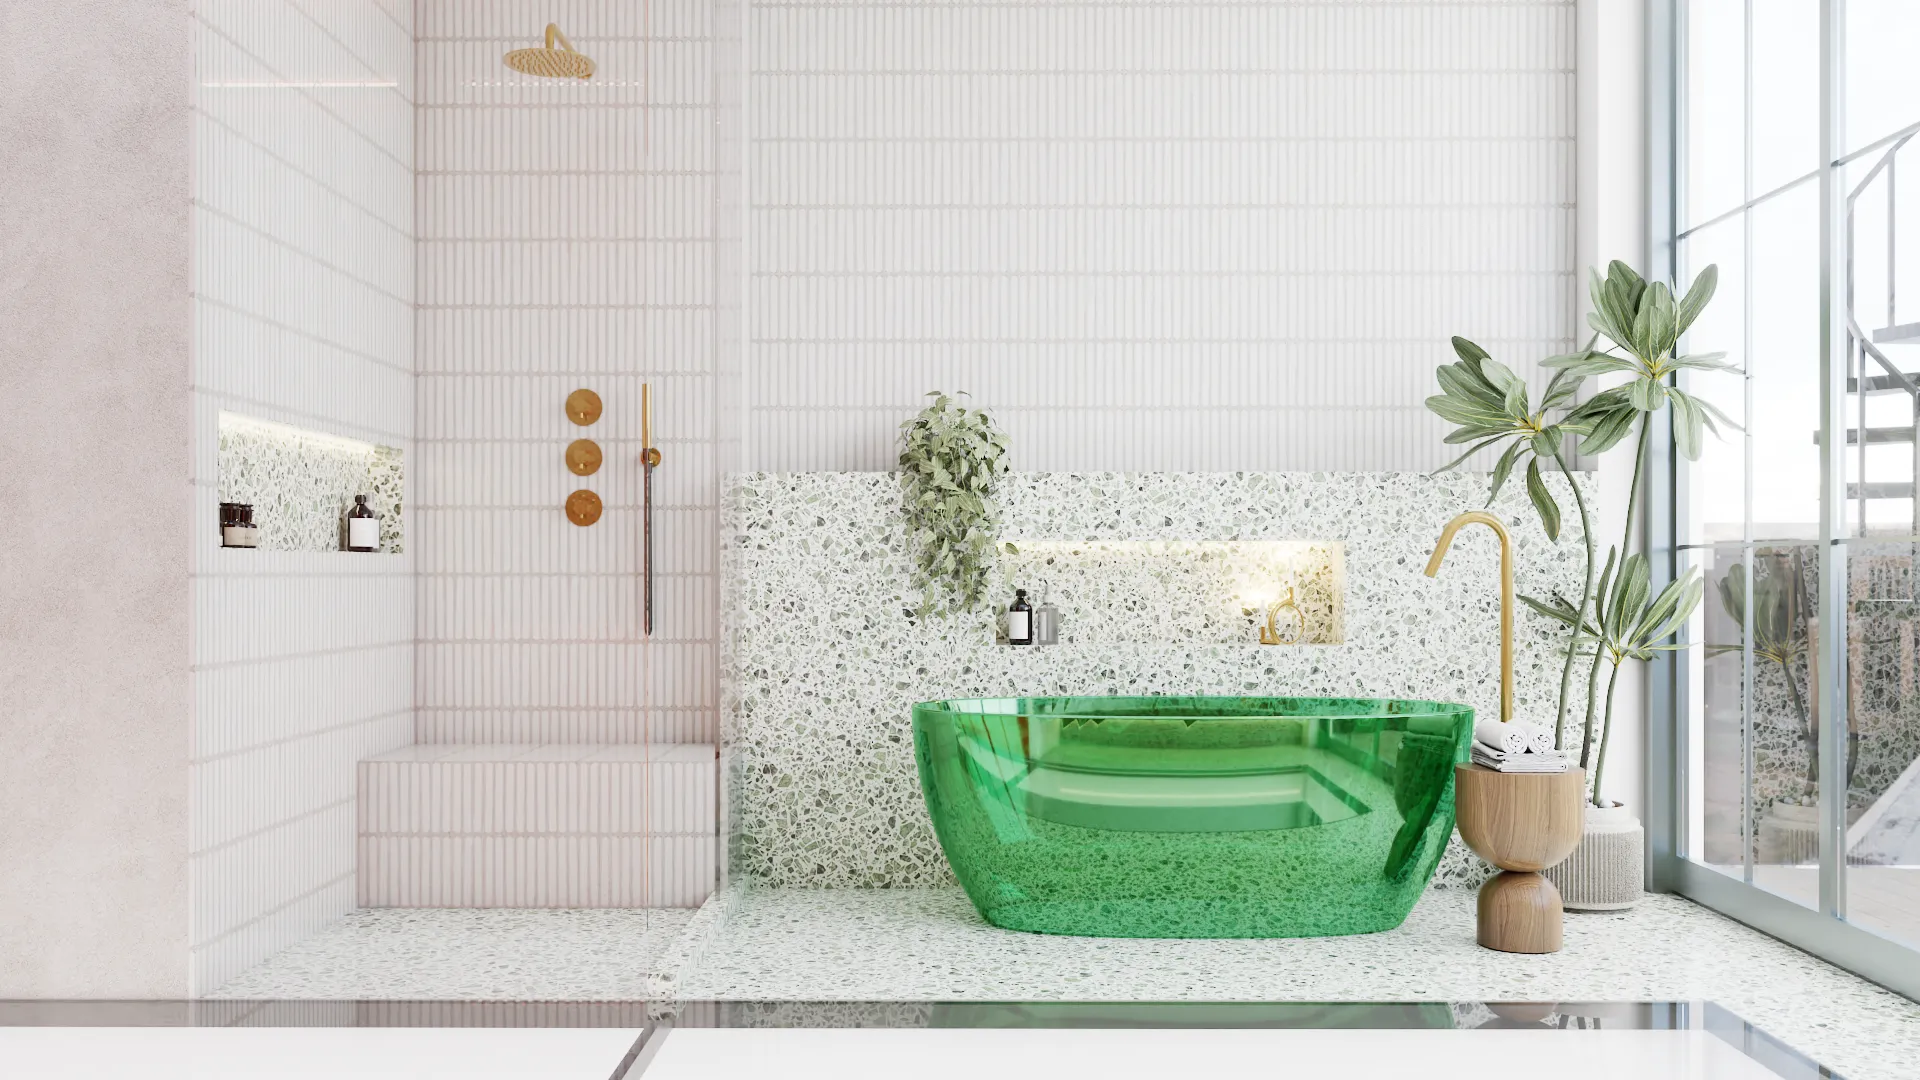 Vibrant tropical-inspired bathroom with a unique green glass basin and a natural mosaic tile wall, accented with golden fixtures and lush greenery. Design by Debora, an online interior design service.